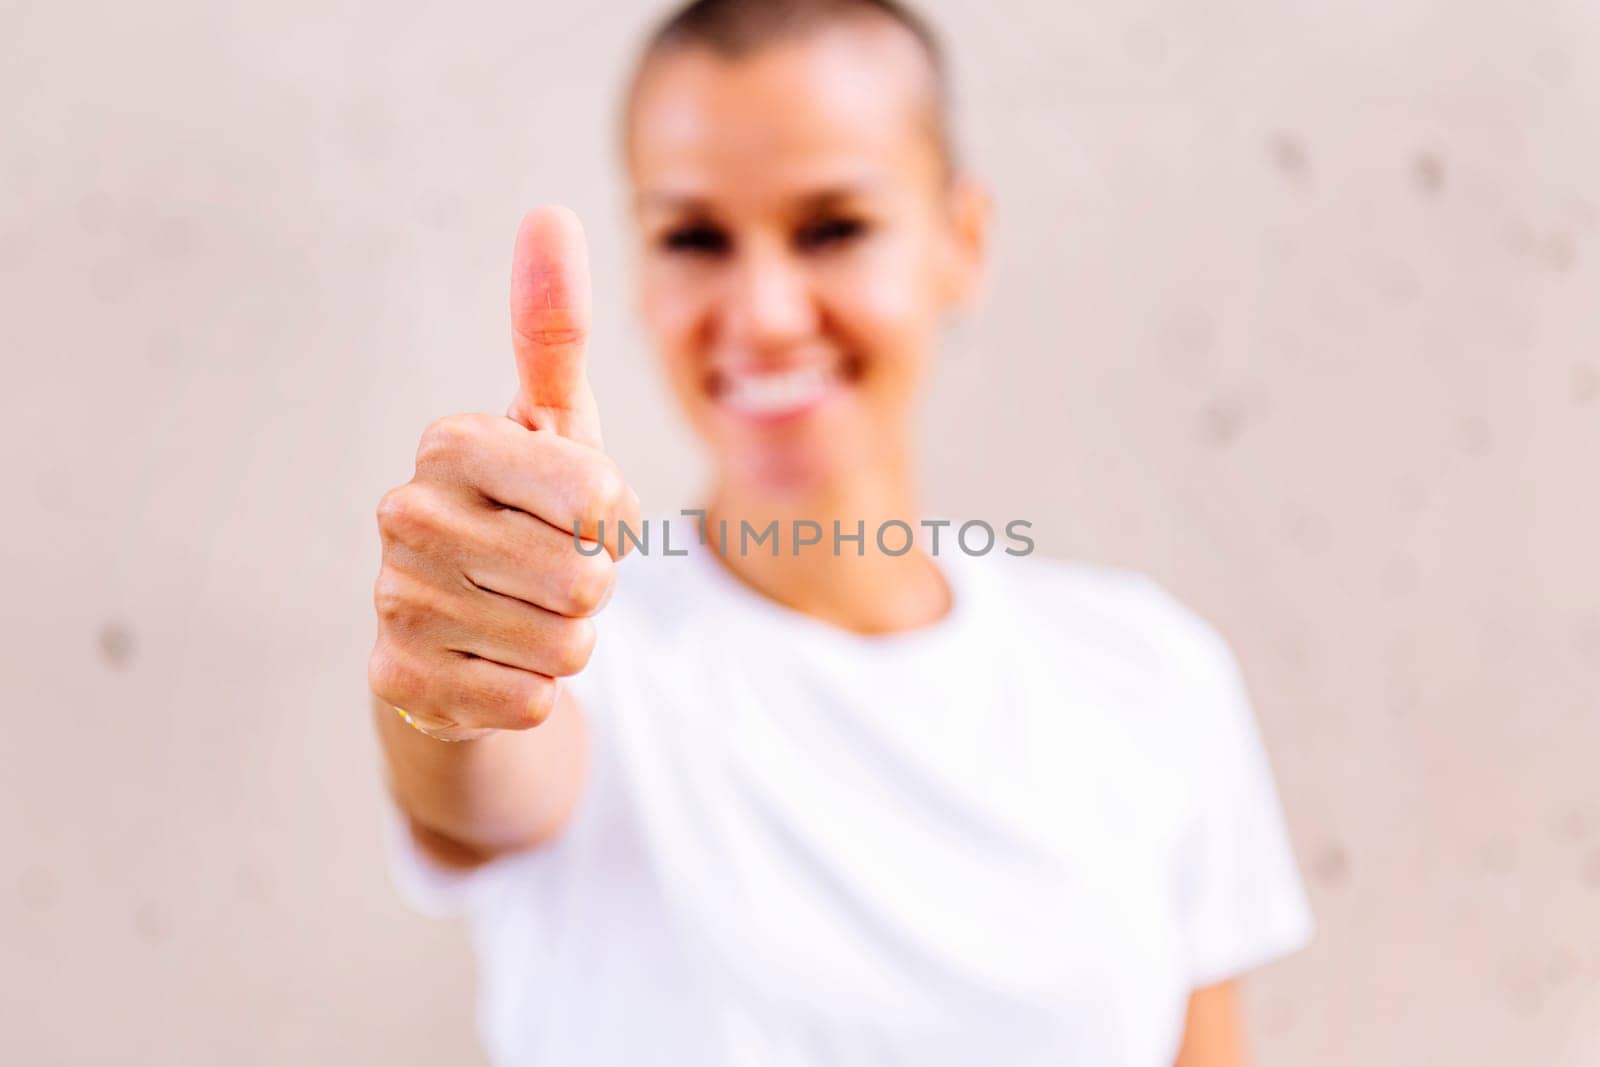 young woman with short hair smiling happy with with thumb up looking at camera, focus on hand, copy space for text